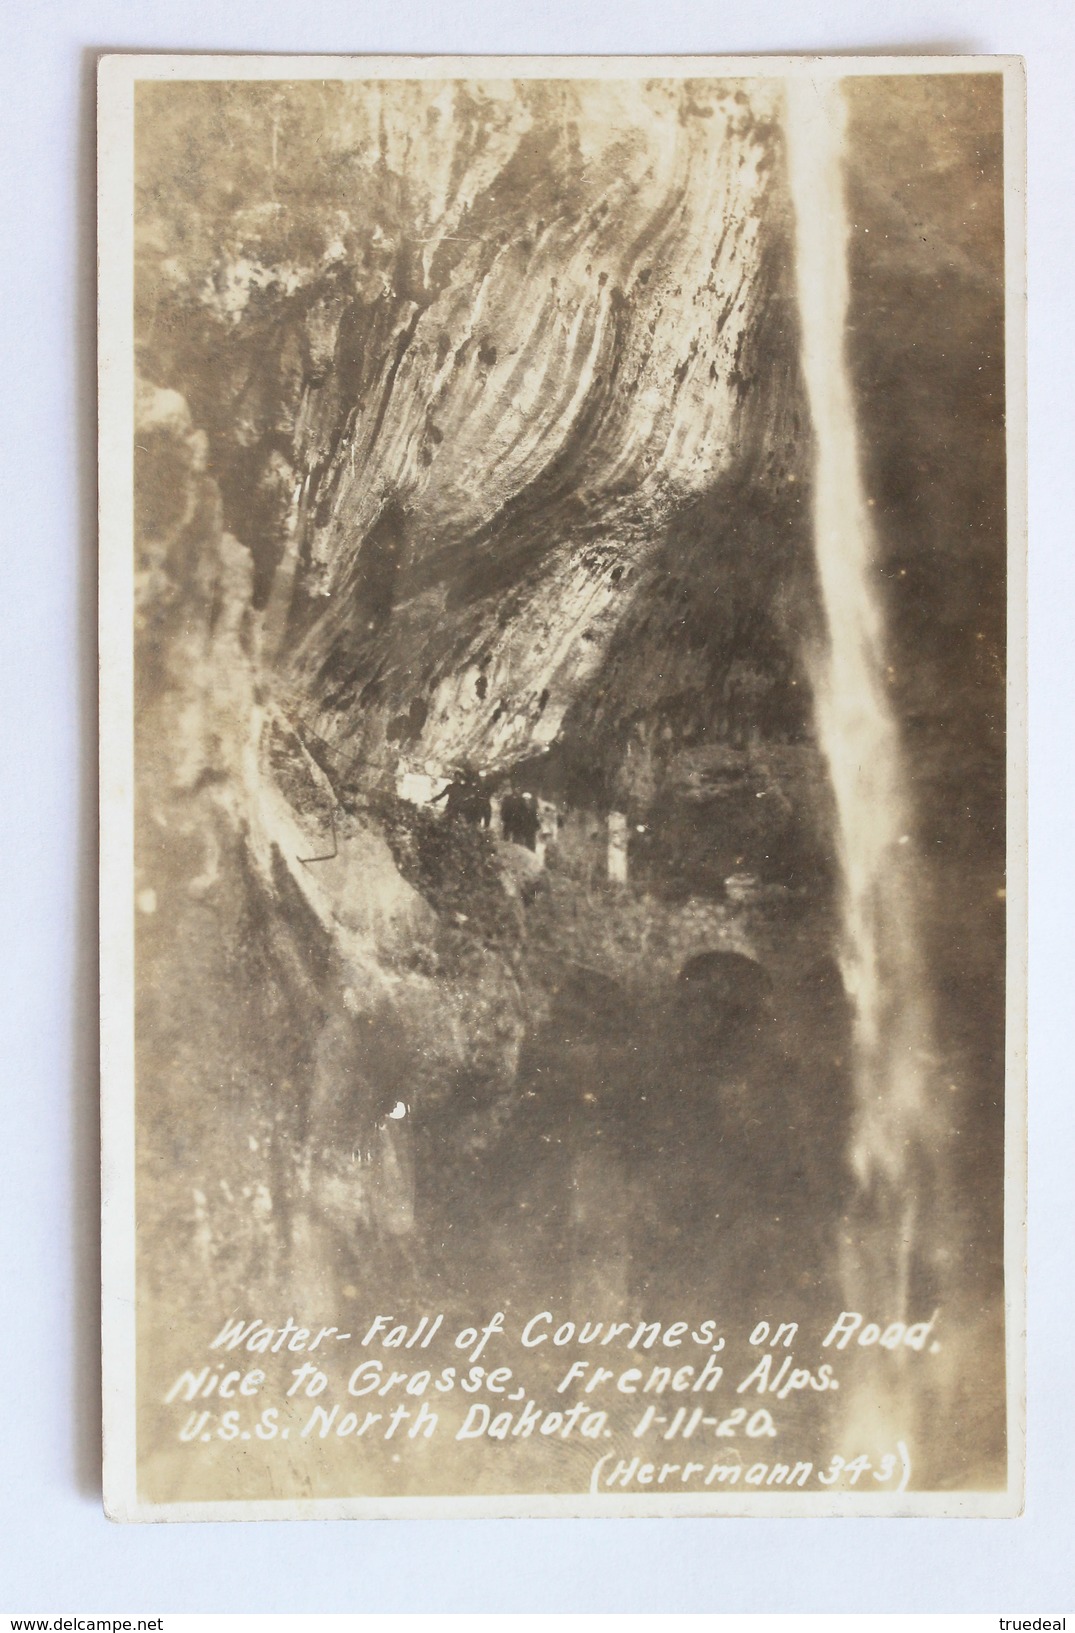 Waterfall Of Cournes On Road Nice To Grasse, French Alps, France, U.S.S. North Dakota, 1920, Real Photo Postcard RPPC - Grasse